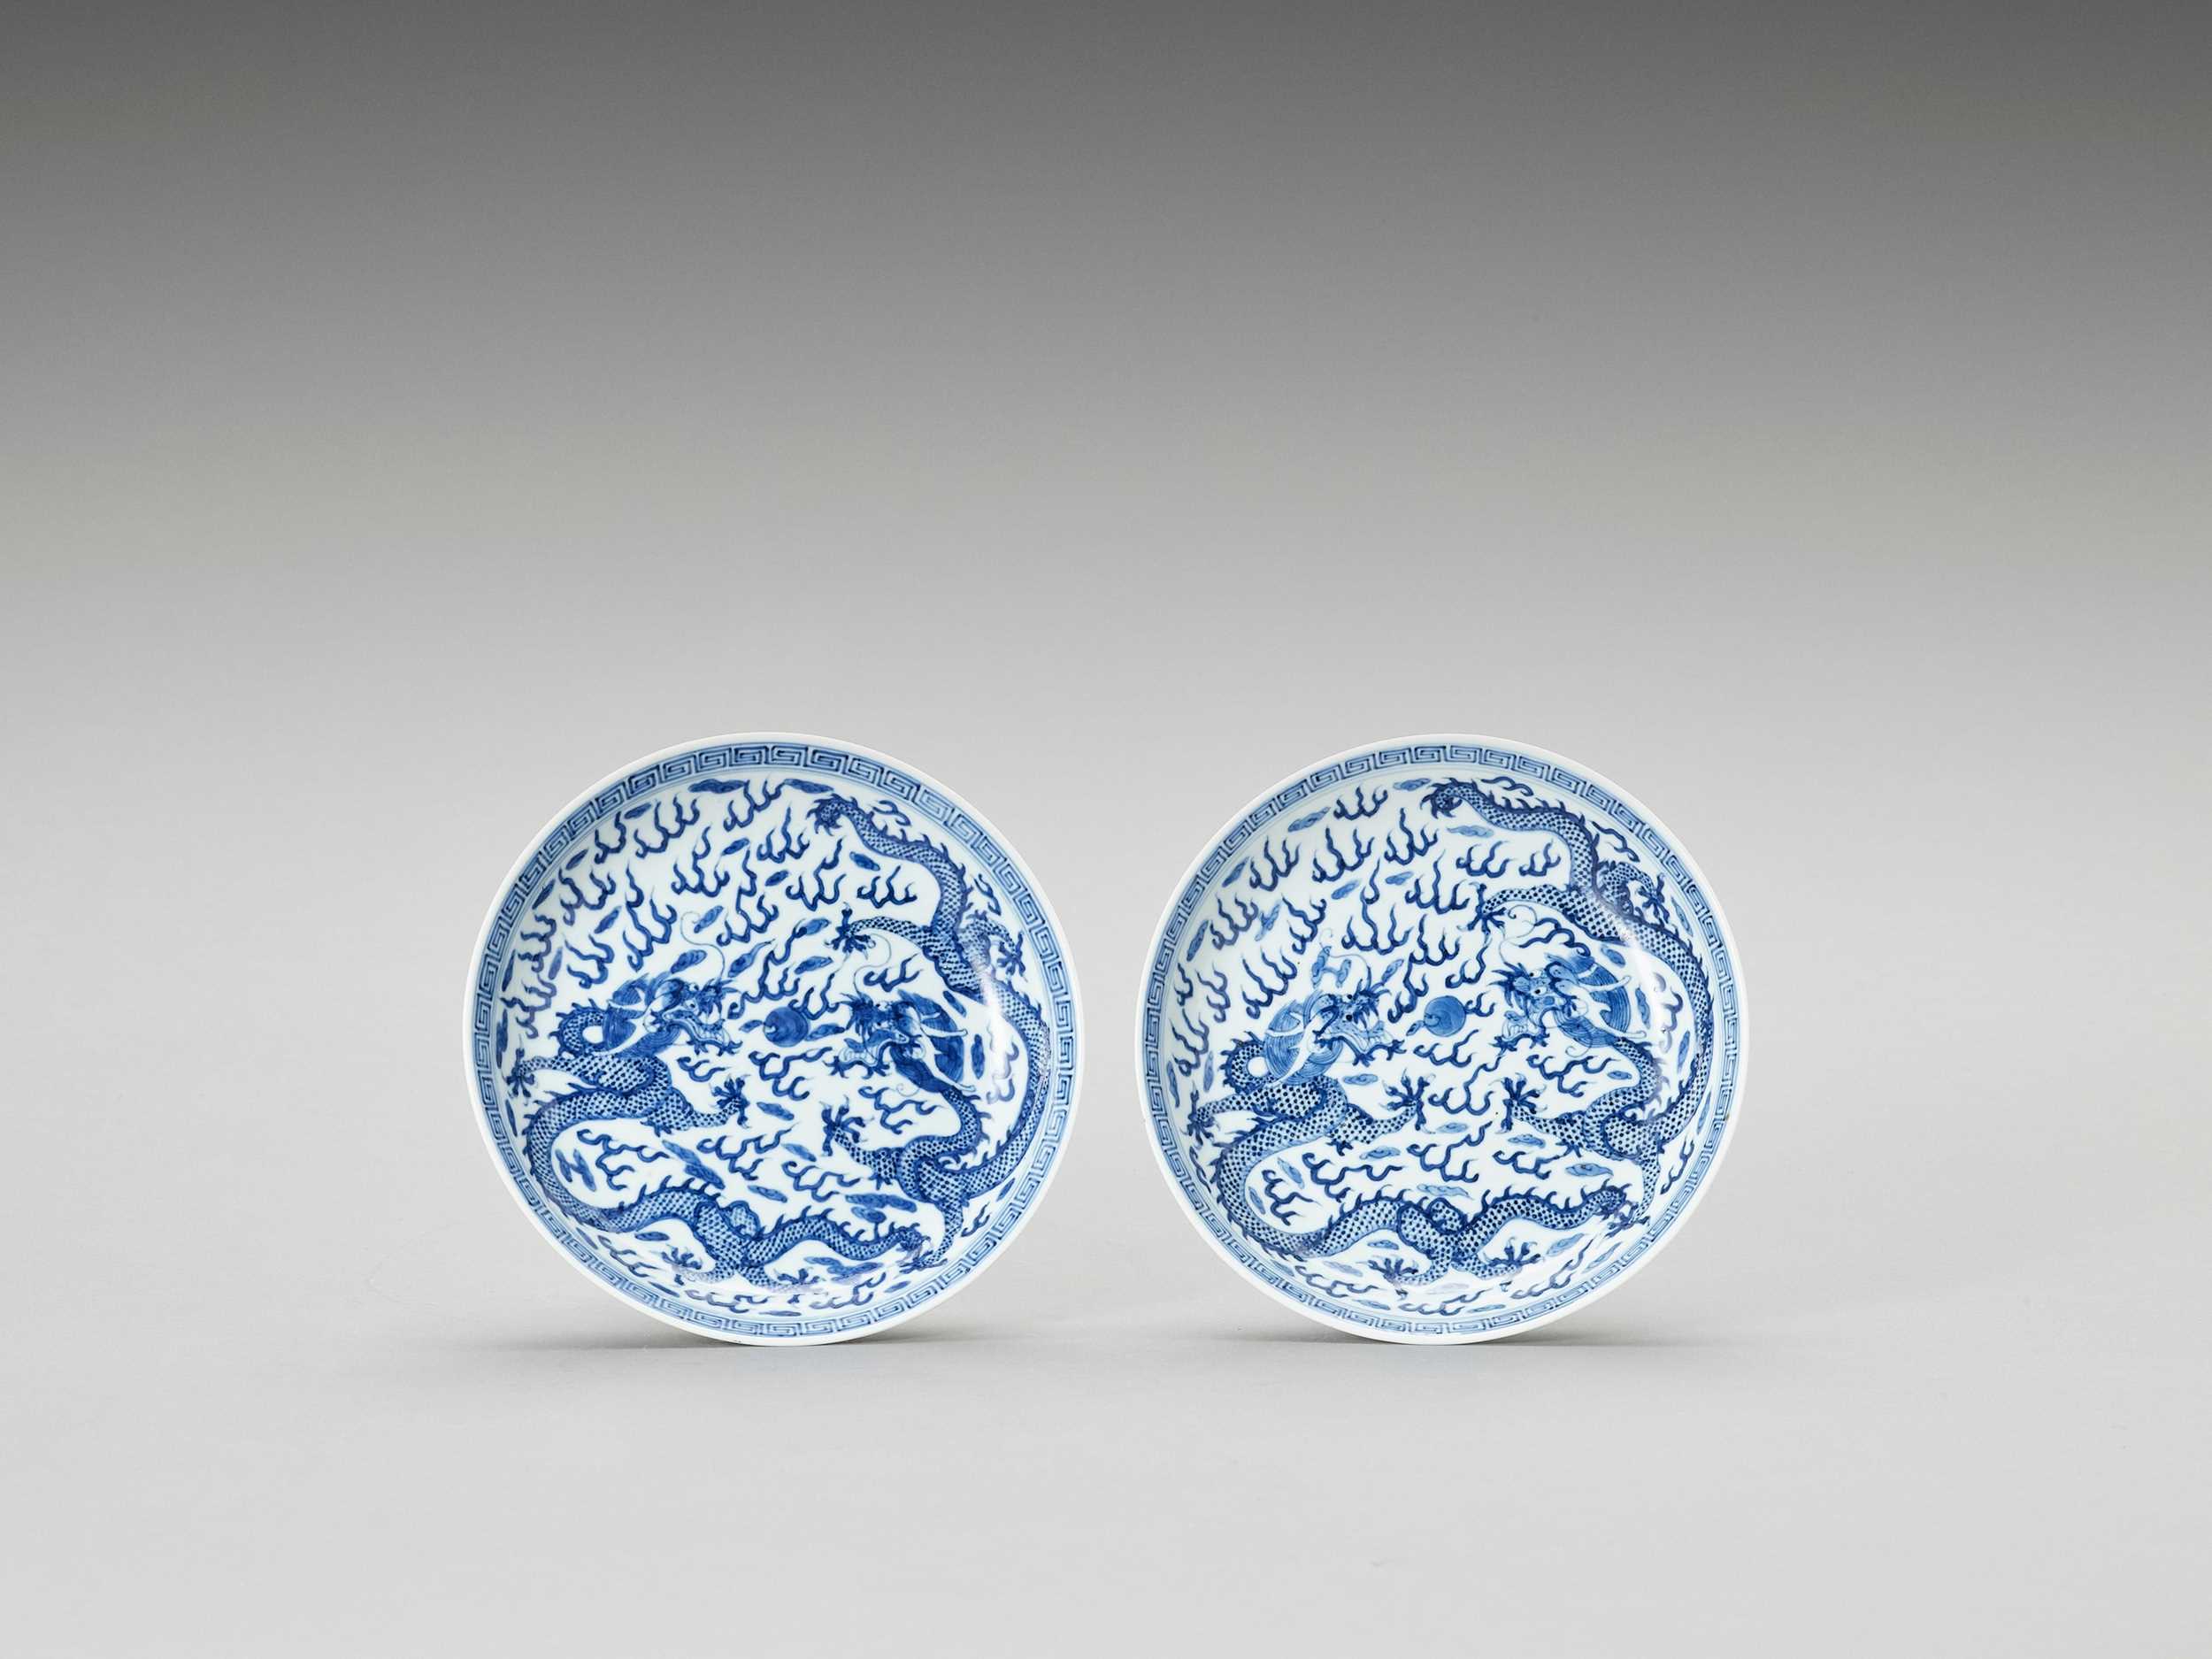 Lot 701 - A PAIR OF BLUE AND WHITE PORCELAIN ‘DRAGONS’ DISHES, LATE QING